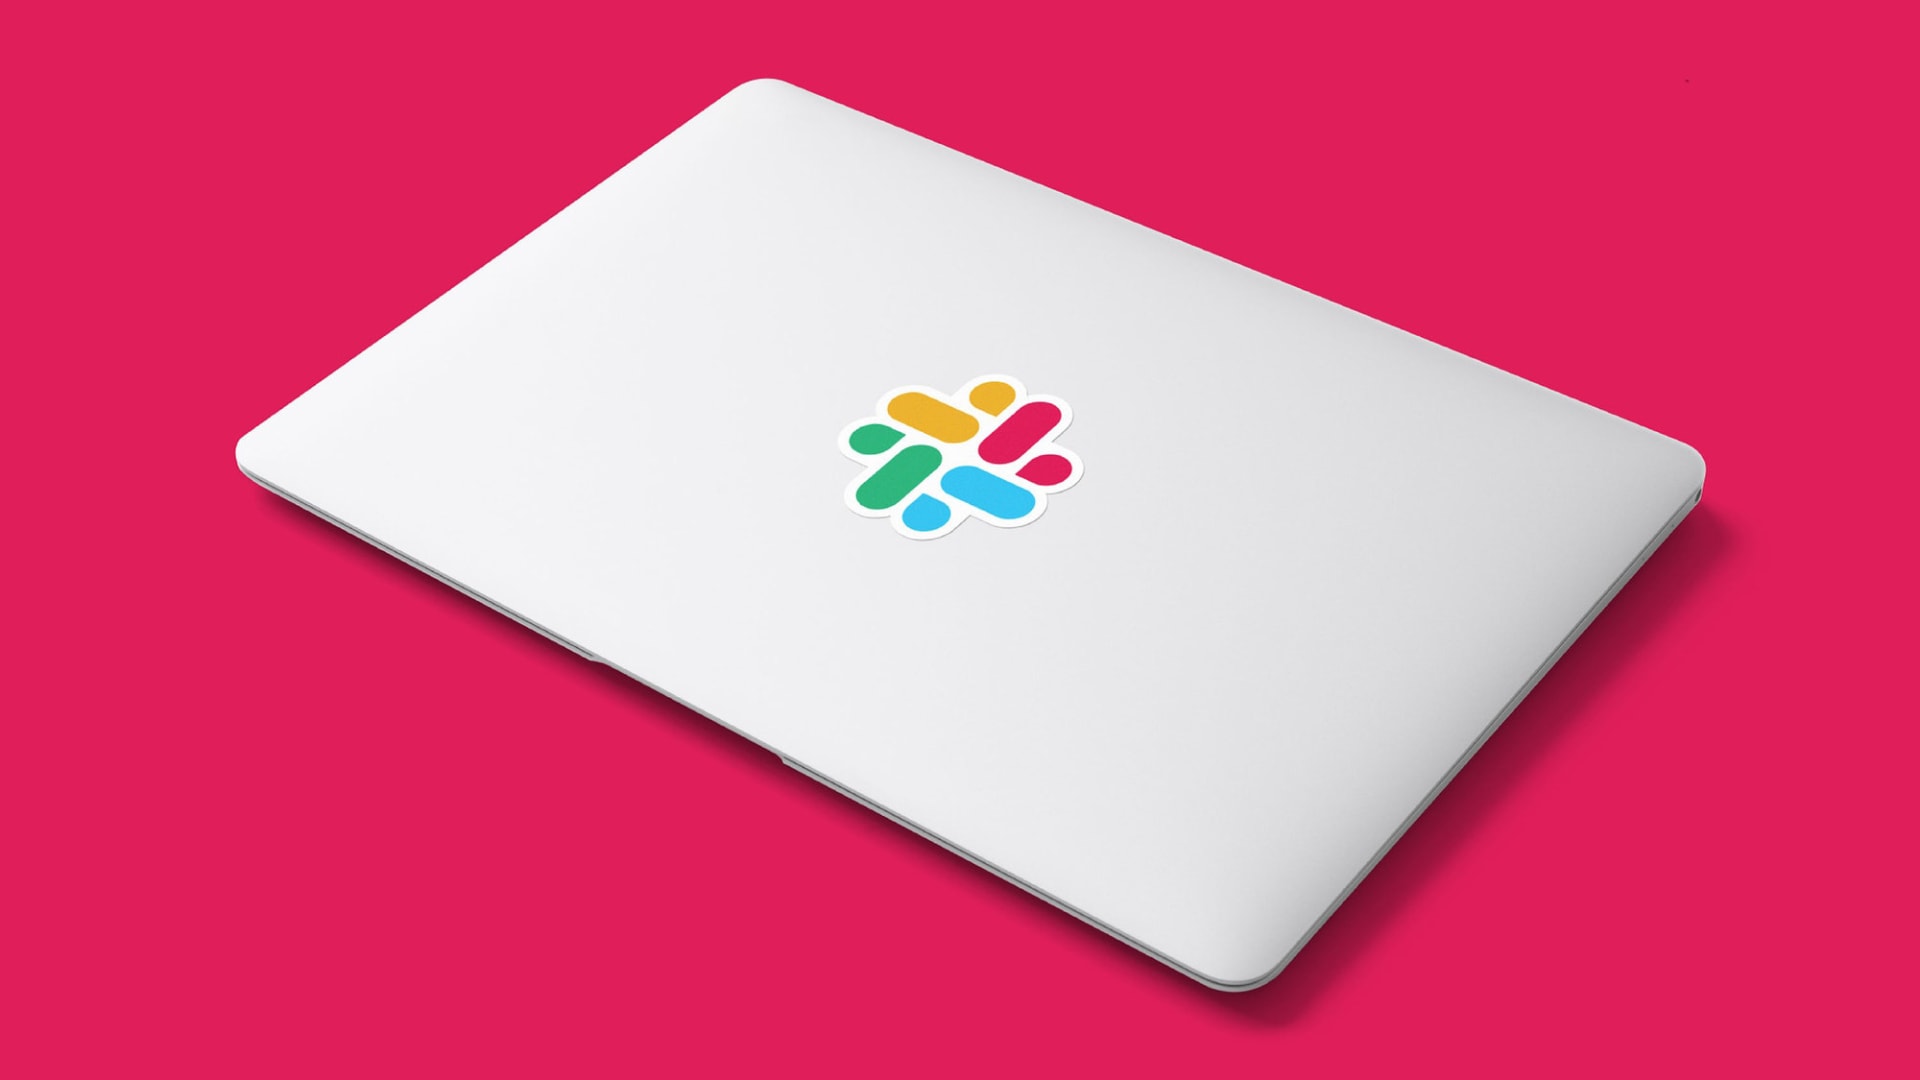 Slack’s new logo ditches the beloved plaid hashtag